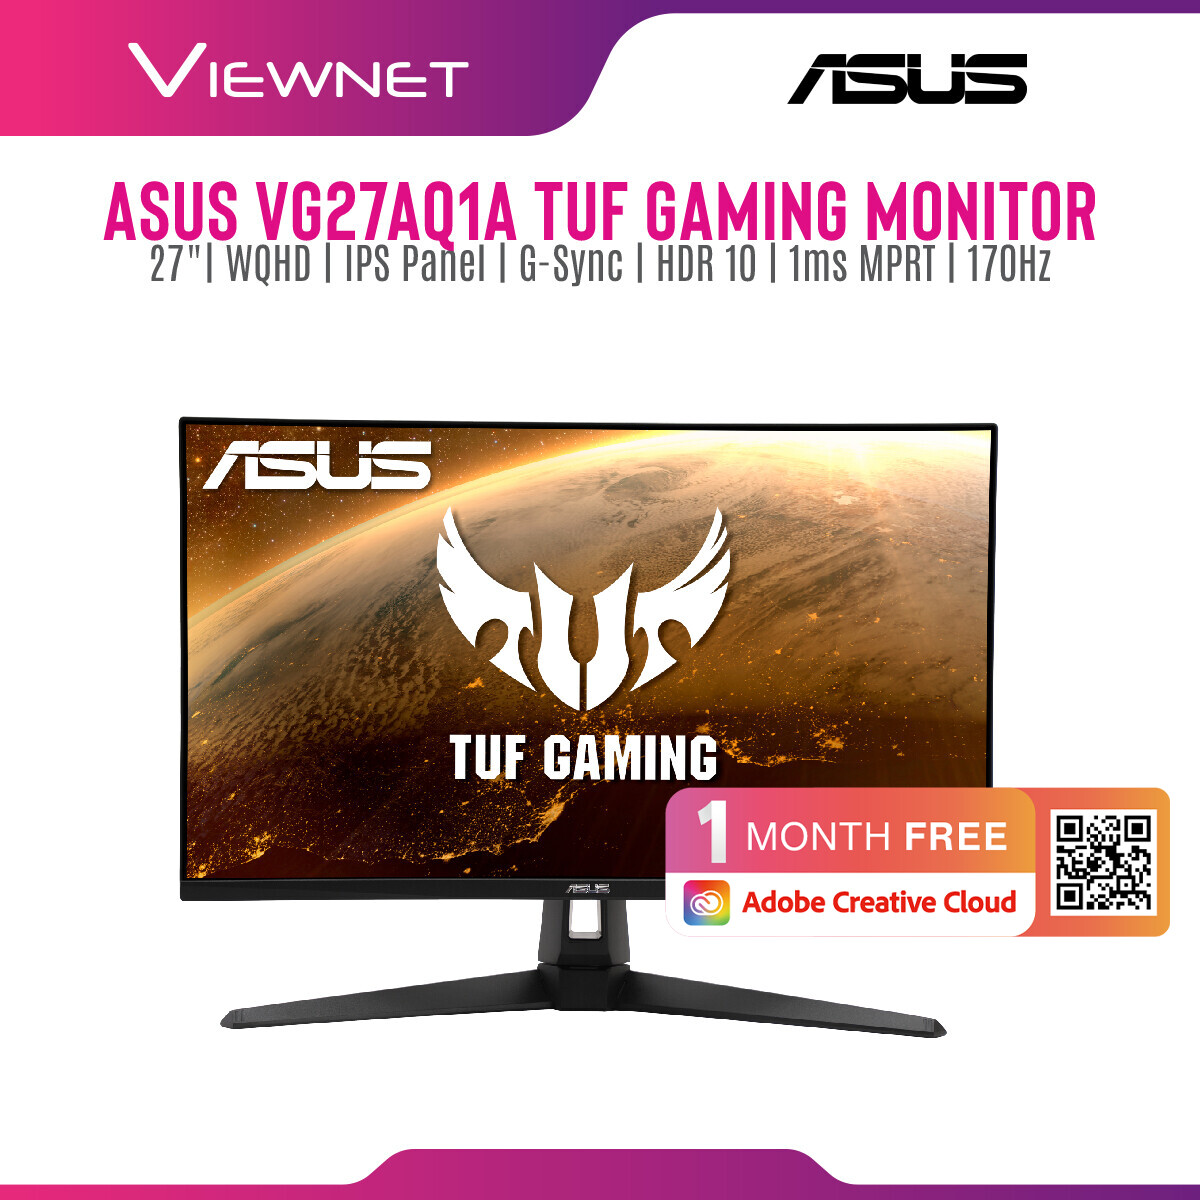 Asus TUF Gaming VG27AQ1A G-SYNC Compatible Gaming Monitor â€“ 27 inch WQHD (2560 x 1440), IPS, 170Hz (Above 144Hz), 1ms MPRT, Extreme Low Motion Blur, G-SYNC Compatible, HDR 10